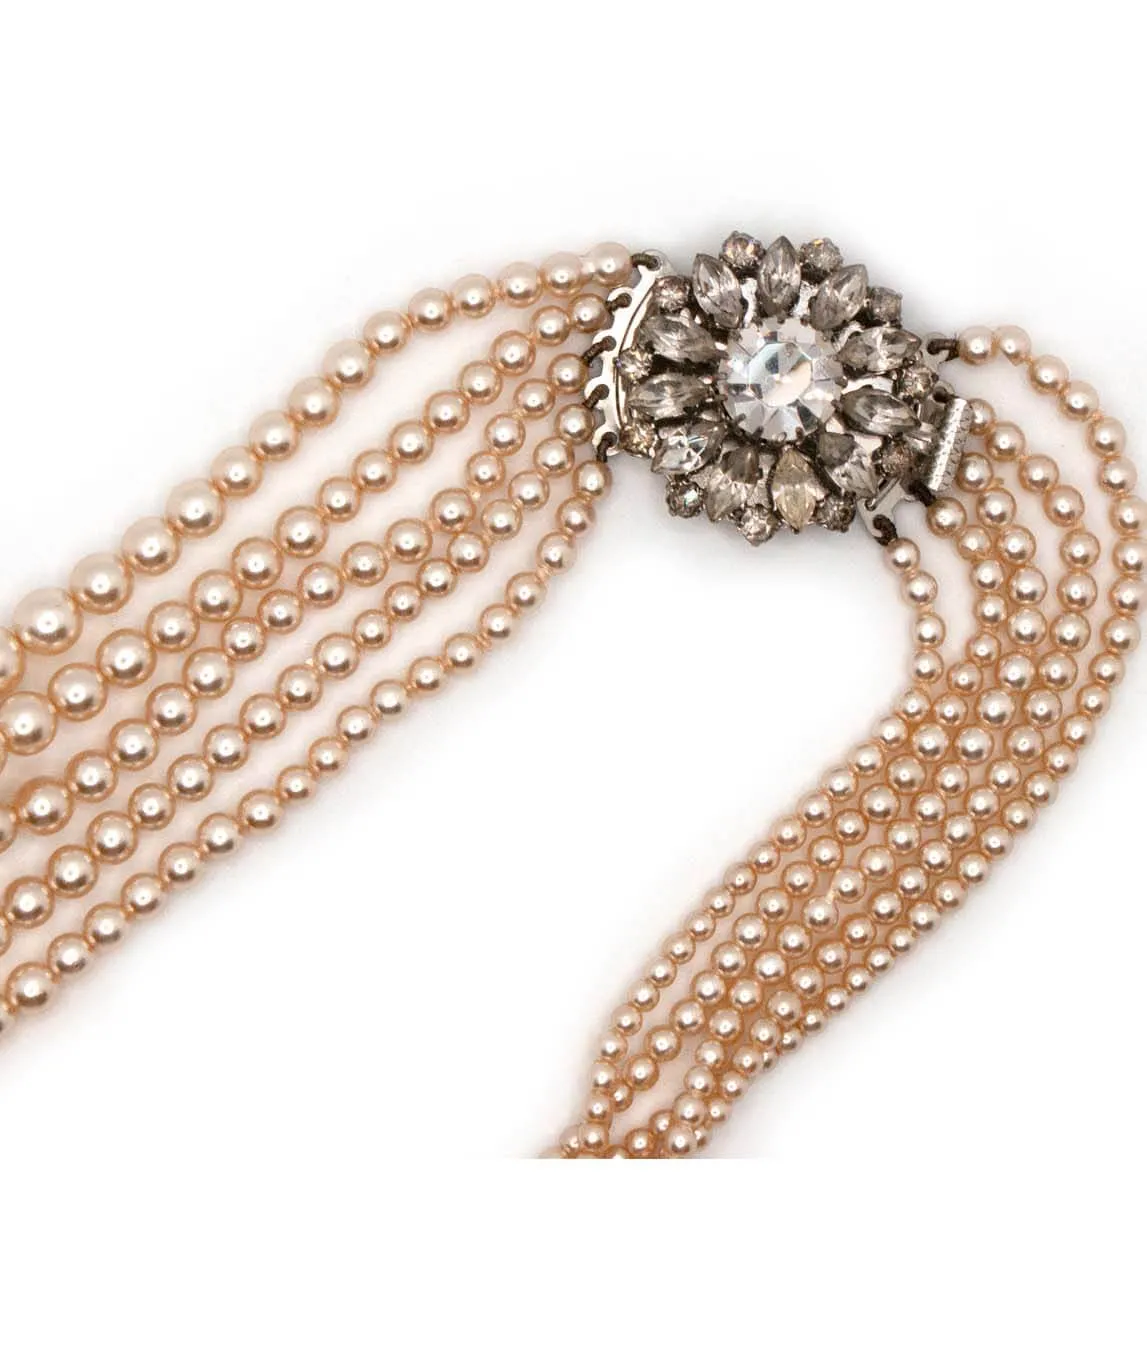 decorative clasp of Vintage multi-strand faux pearl necklace